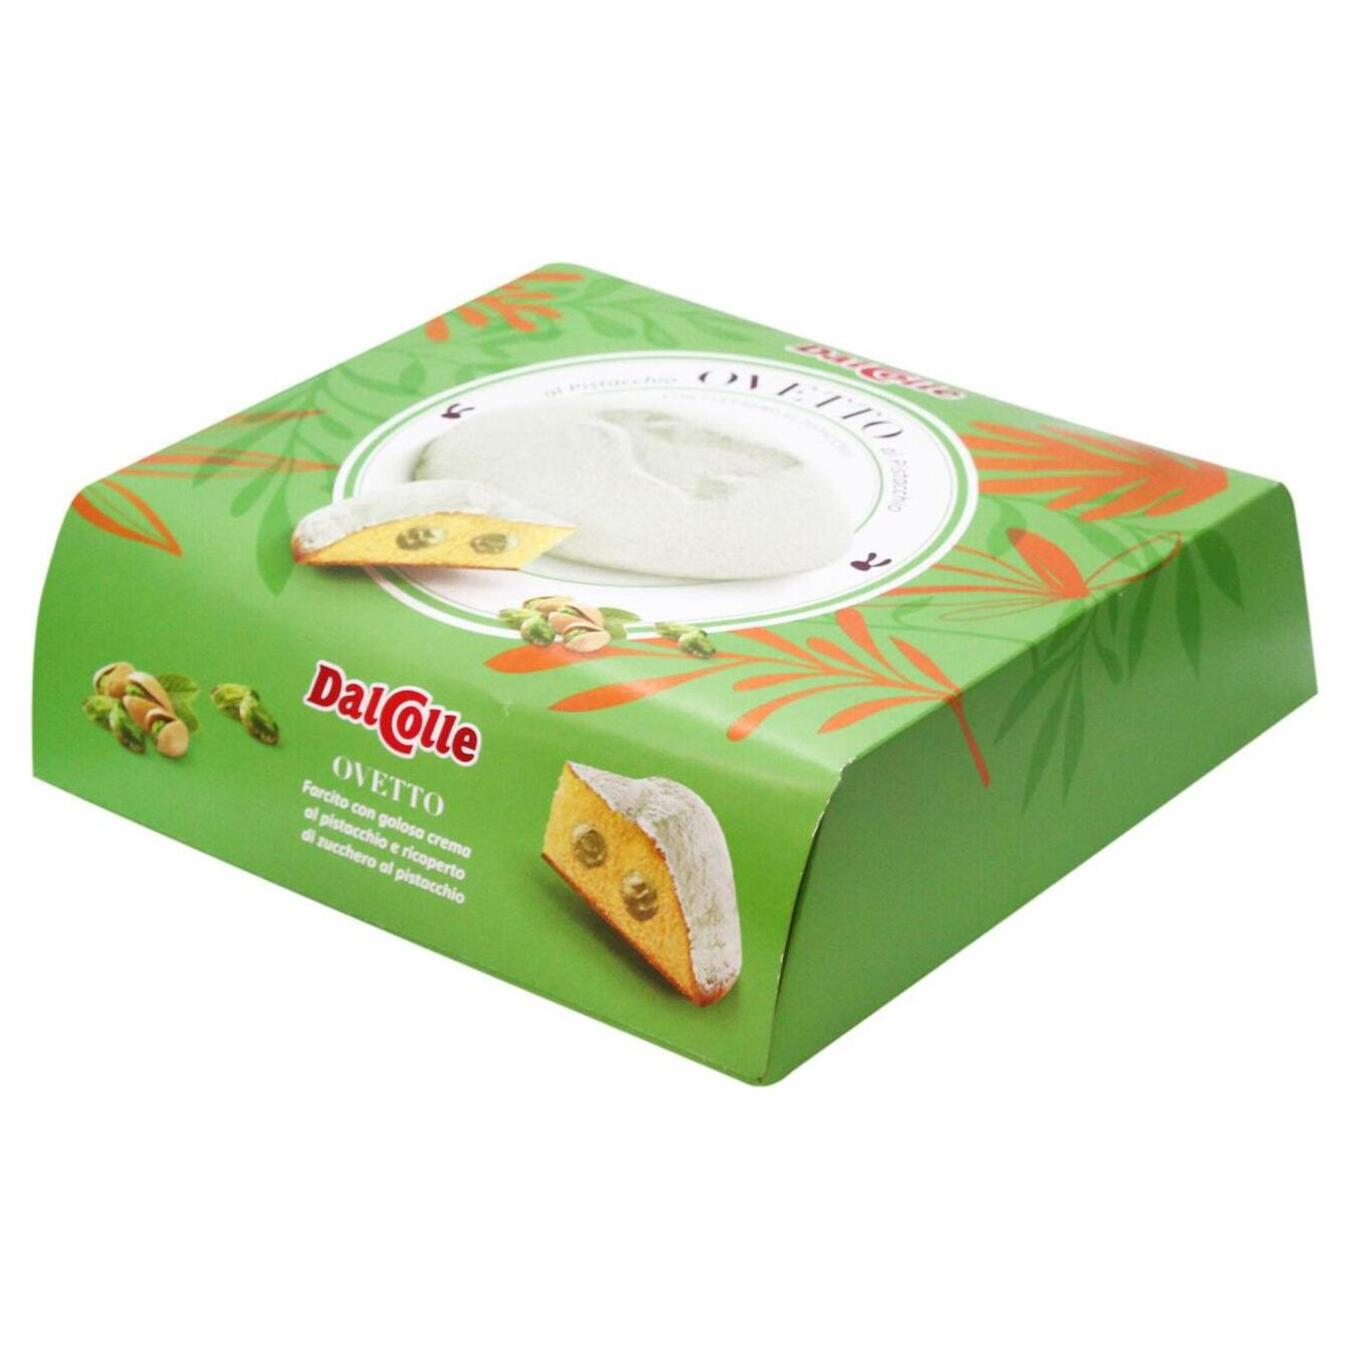 Dal Colle panettone with pistachio flavor 350g